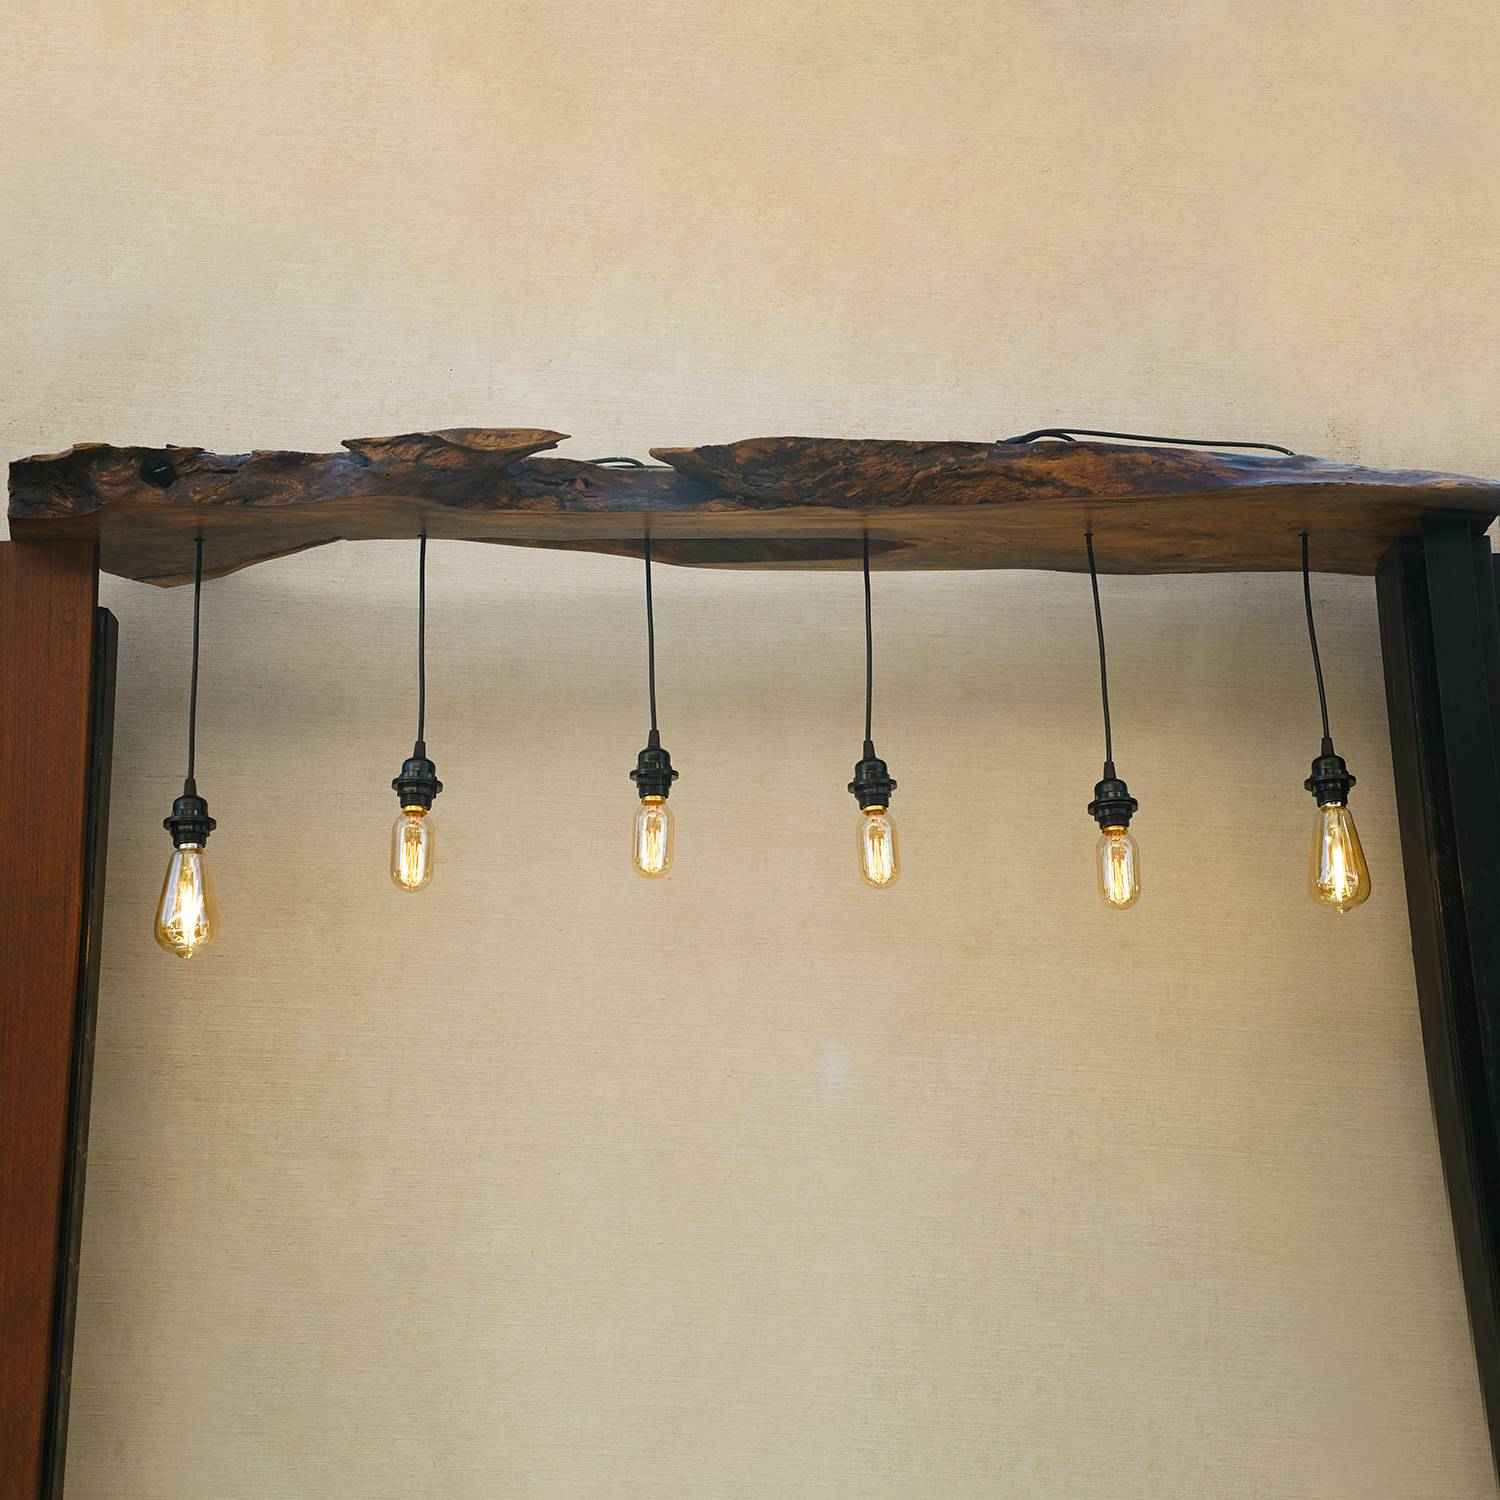 Pine wood Ceiling light (Recycled Bottles)